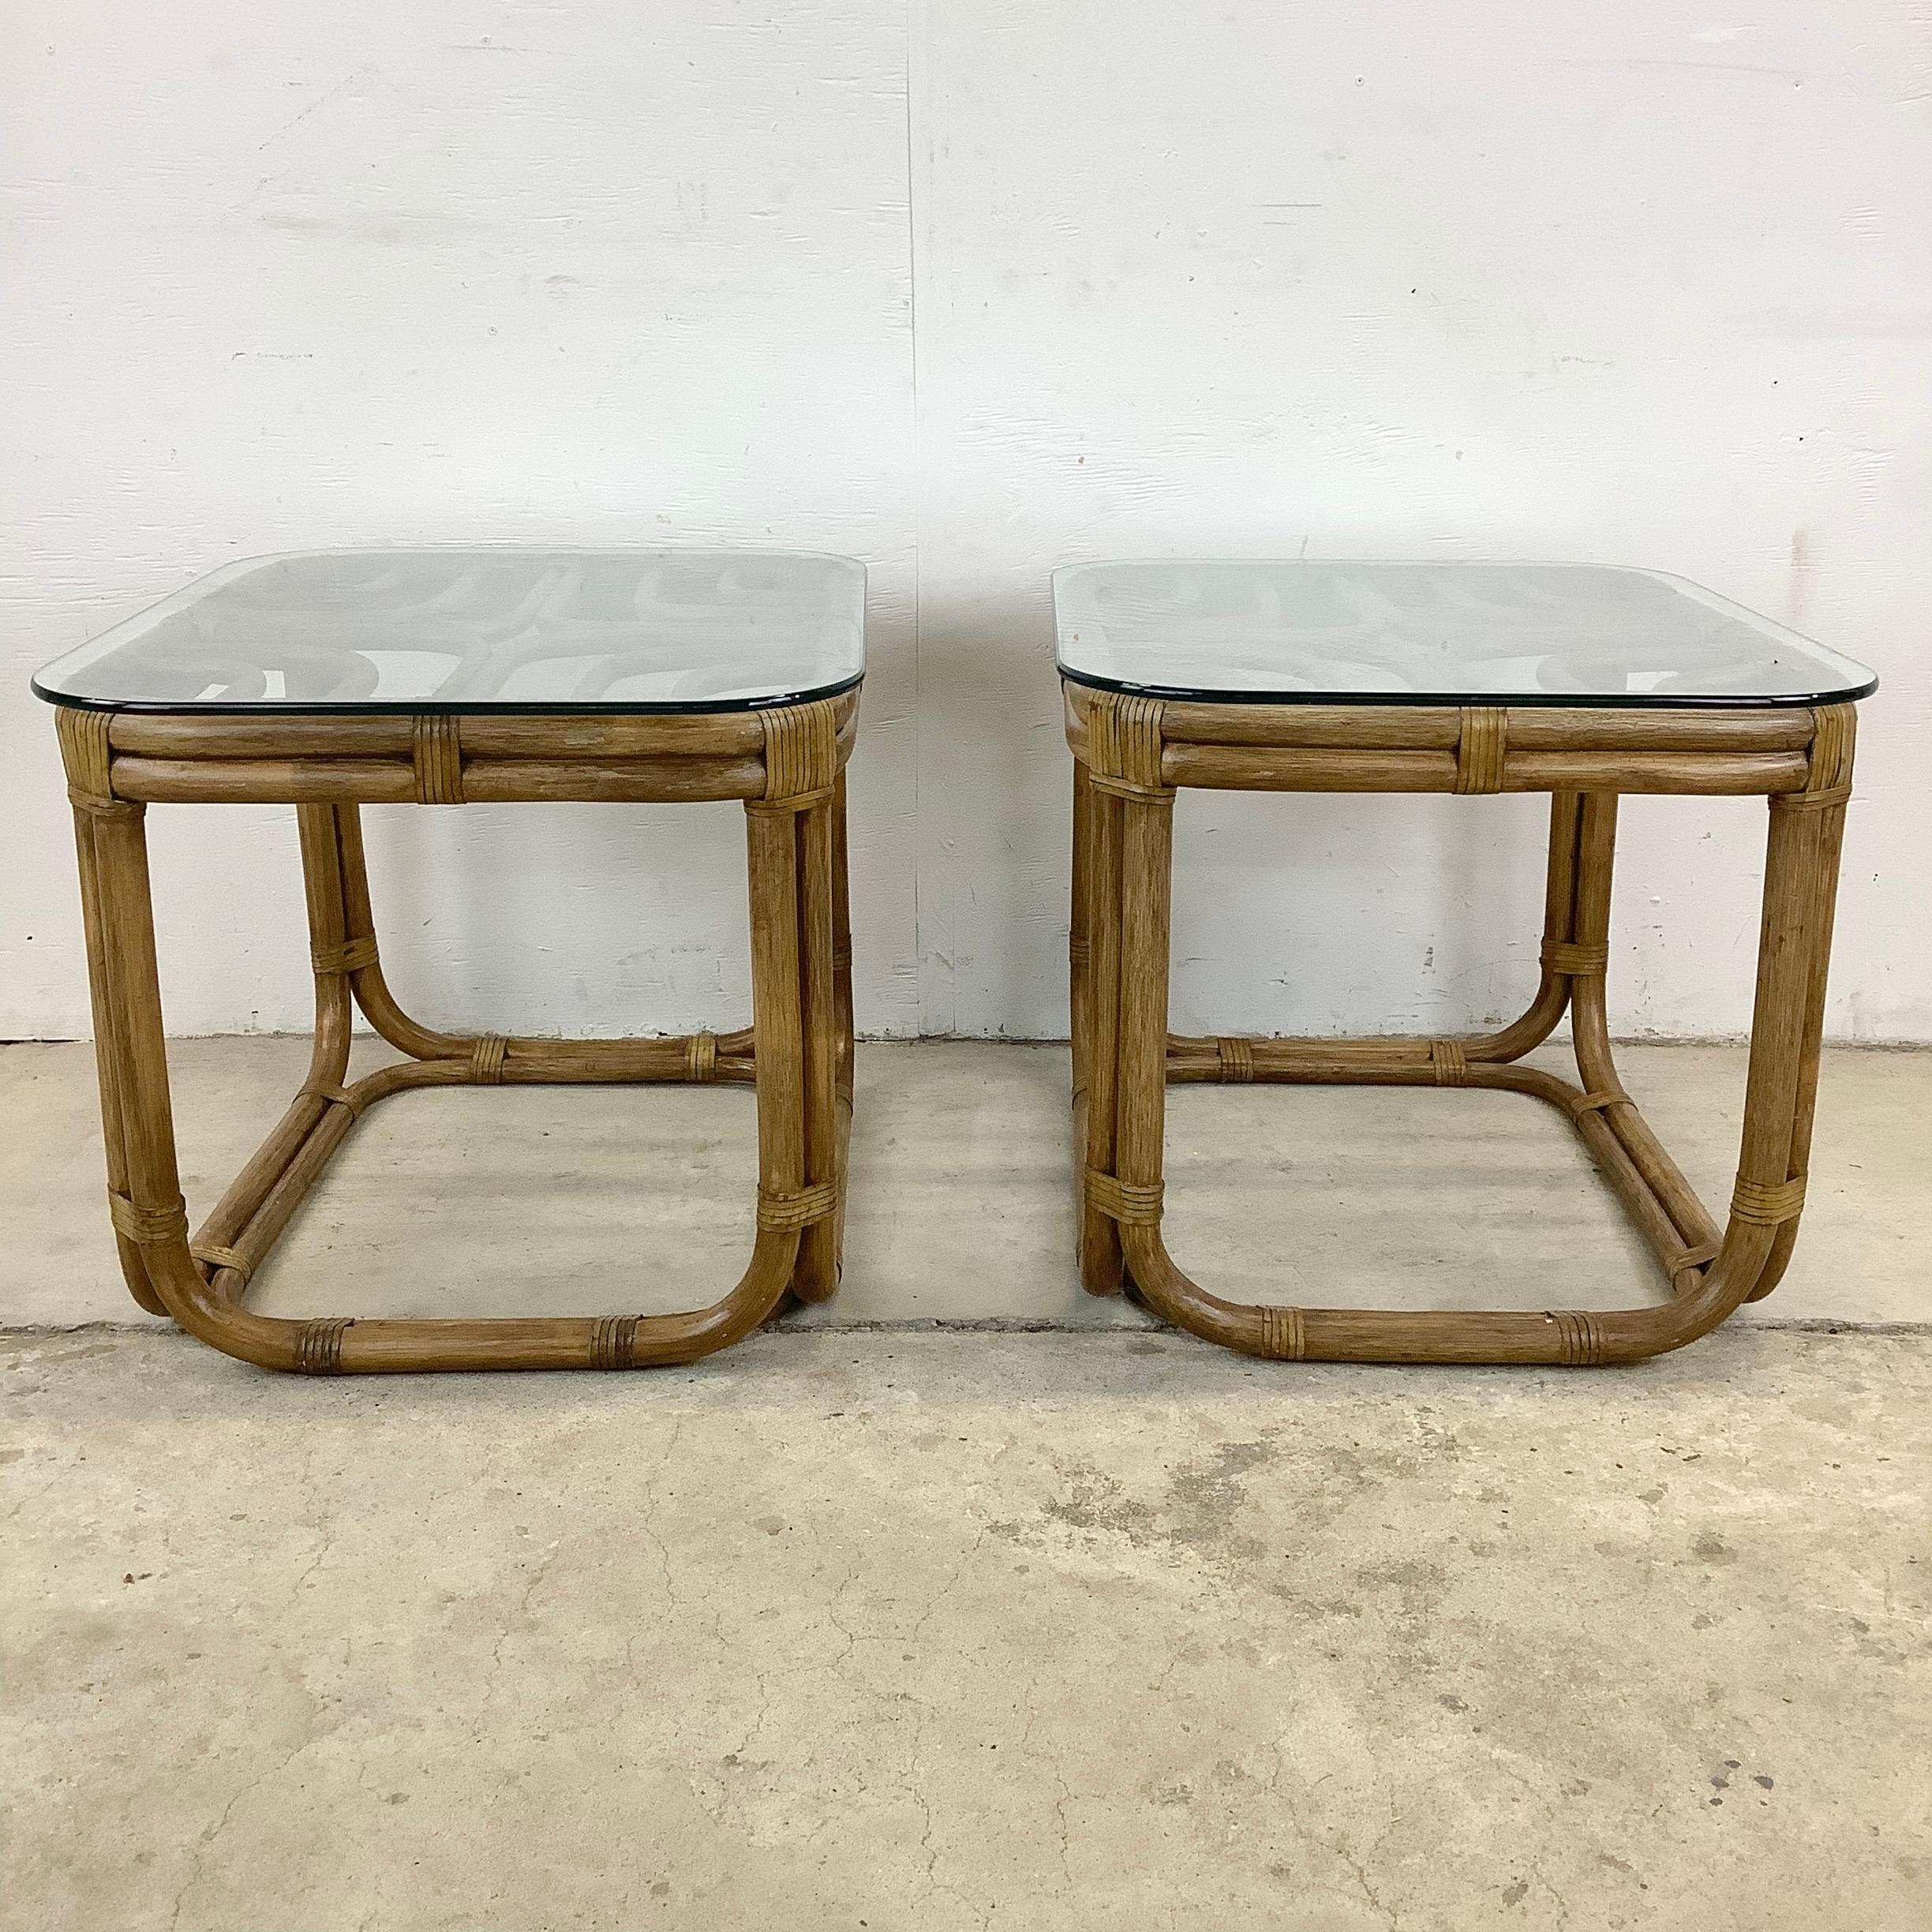 Pair Coastal Rattan Side Tables after Brown Jordan In Good Condition For Sale In Trenton, NJ